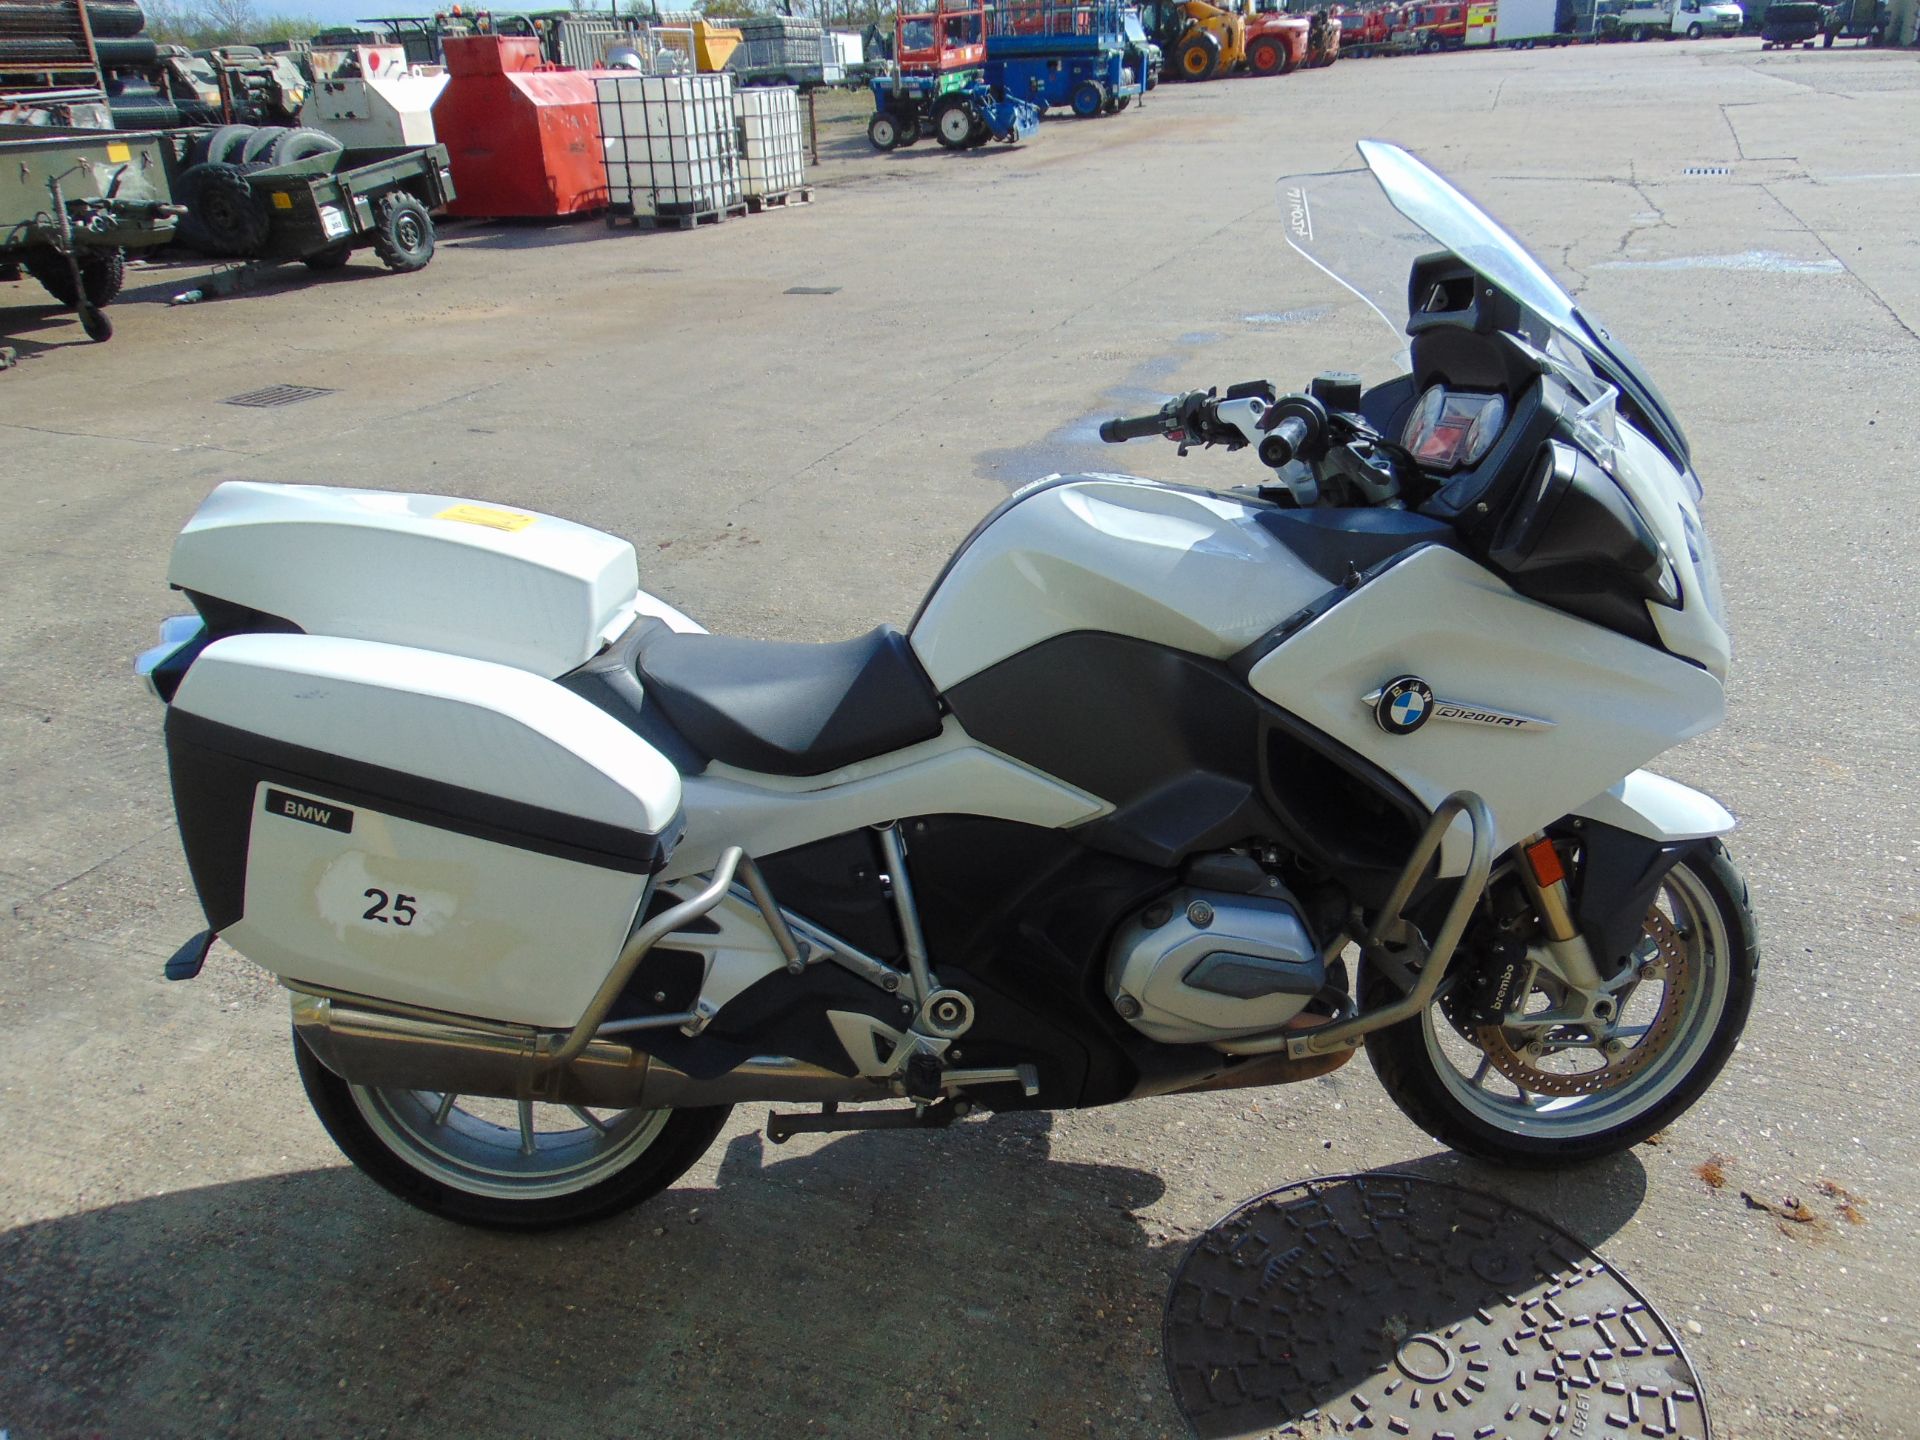 2018 BMW R1200RT Motorbike 50,000 miles from UK Police - Image 5 of 38